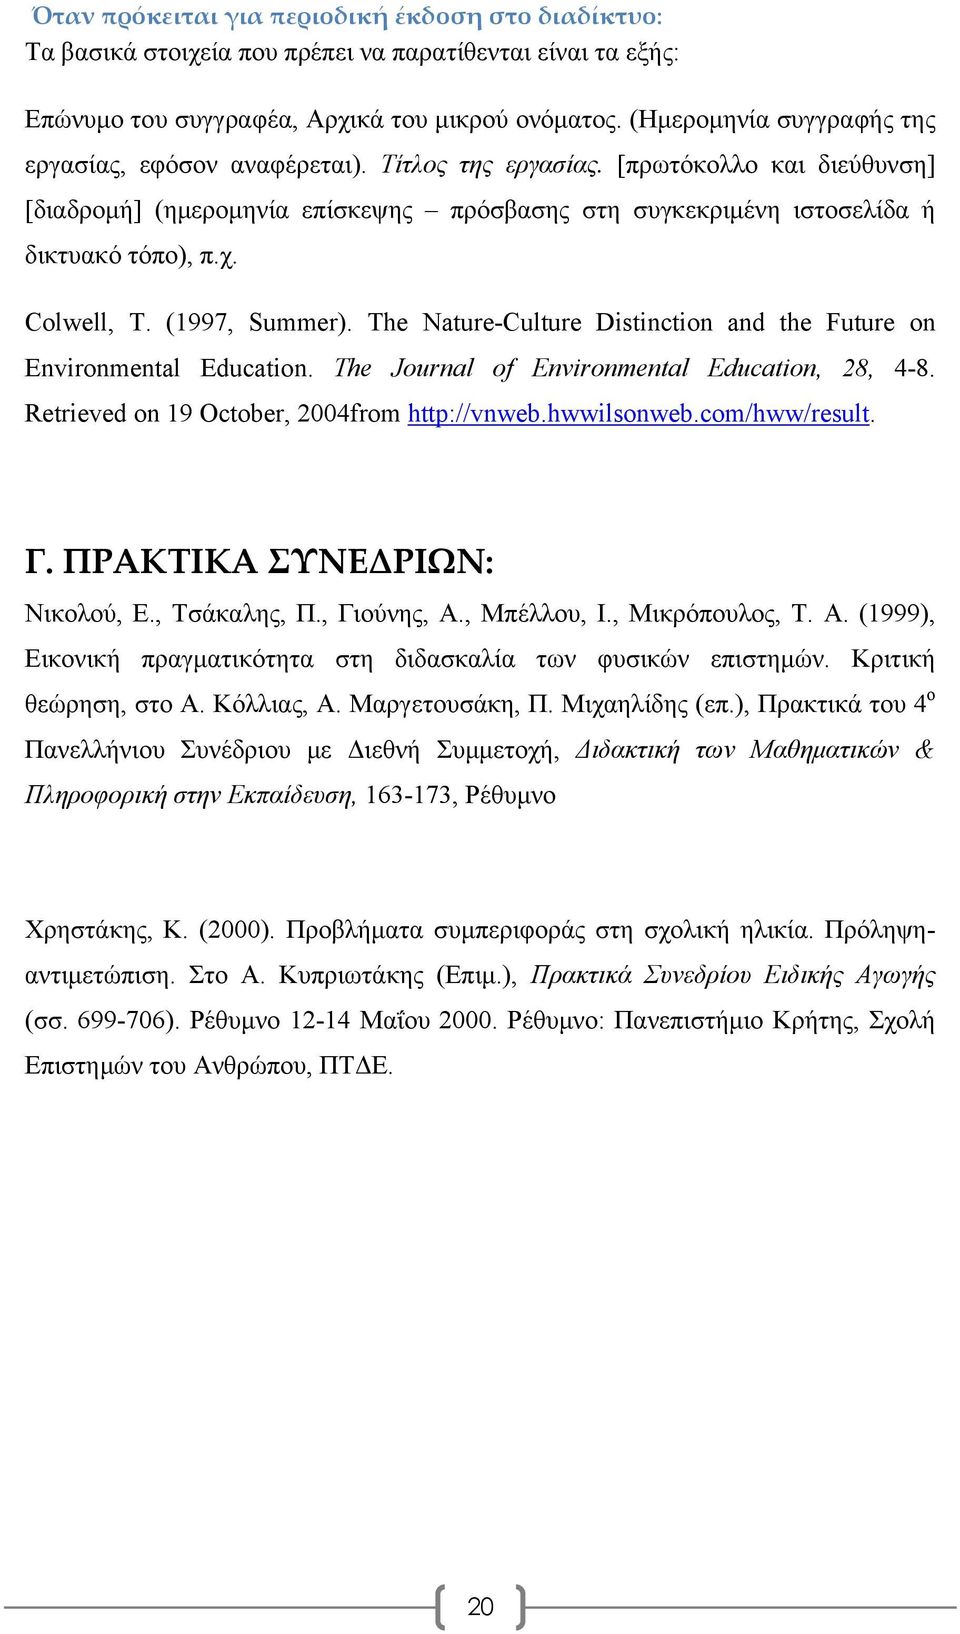 Colwell, T. (1997, Summer). The Nature-Culture Distinction and the Future on Environmental Education. The Journal of Environmental Education, 28, 4-8. Retrieved on 19 October, 2004from http://vnweb.